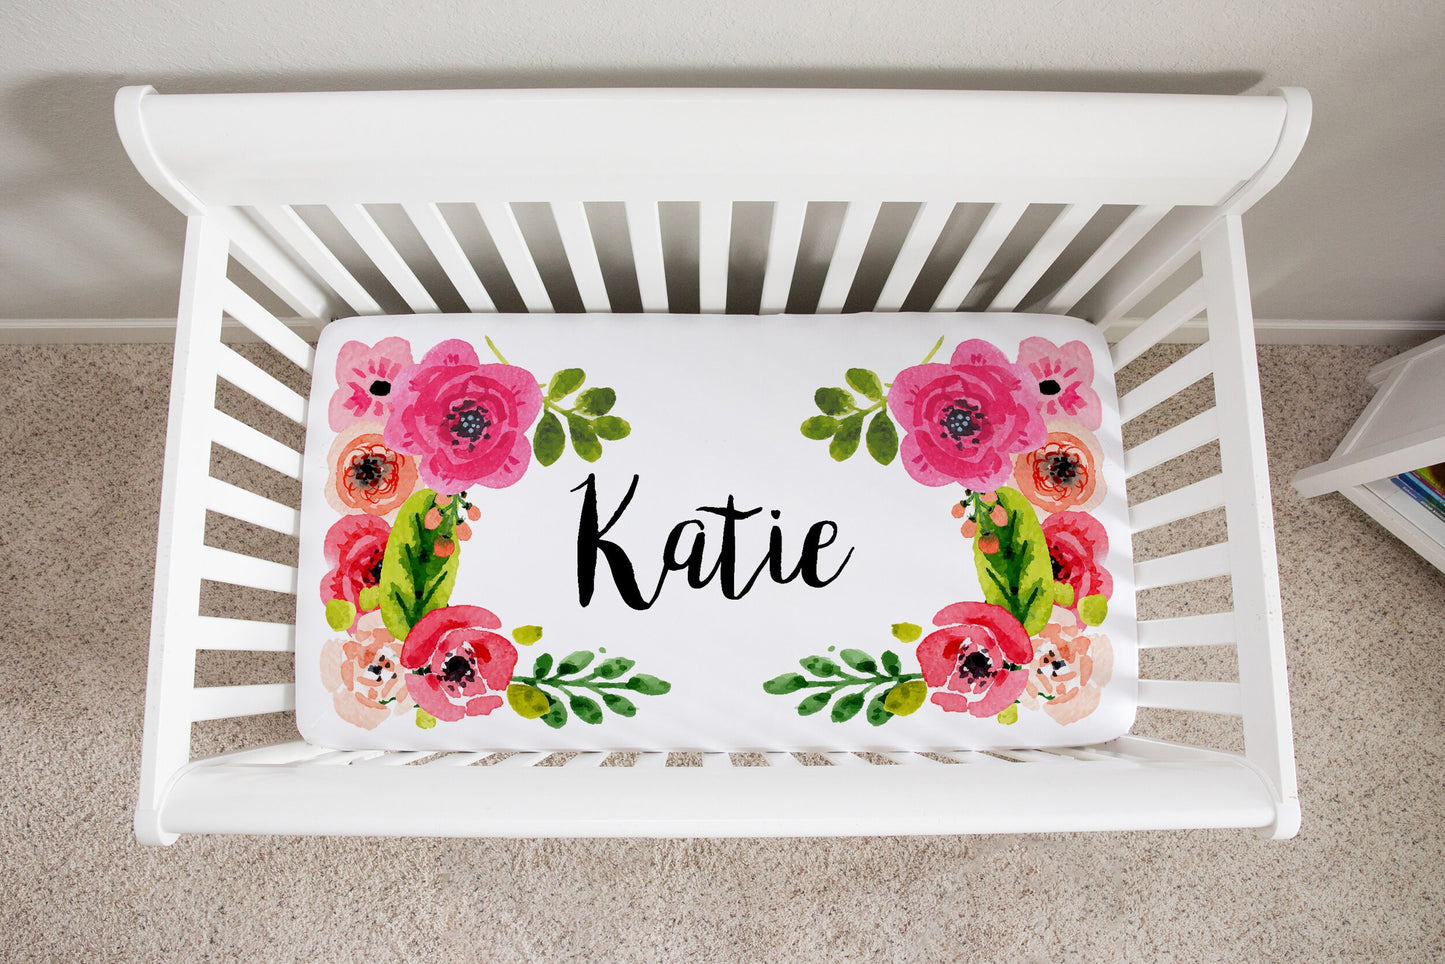 Personalized Floral Crib Sheet - Stick'em Up Baby®